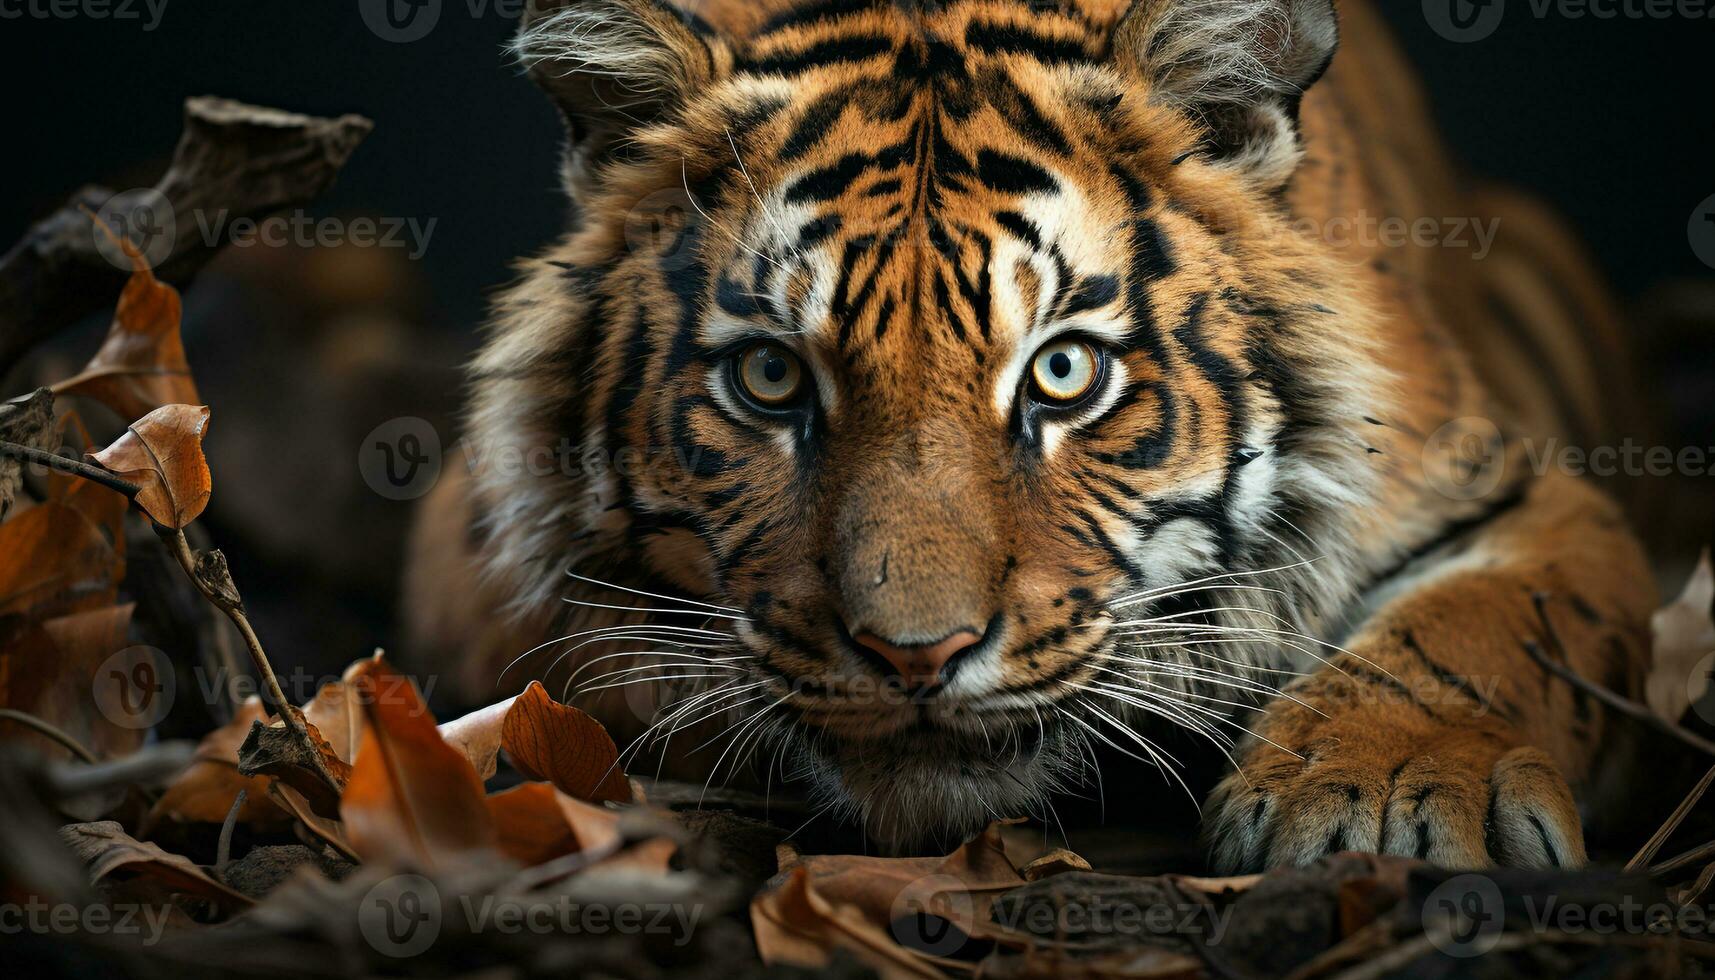 Majestic Bengal tiger, close up portrait, staring with alertness generated by AI photo